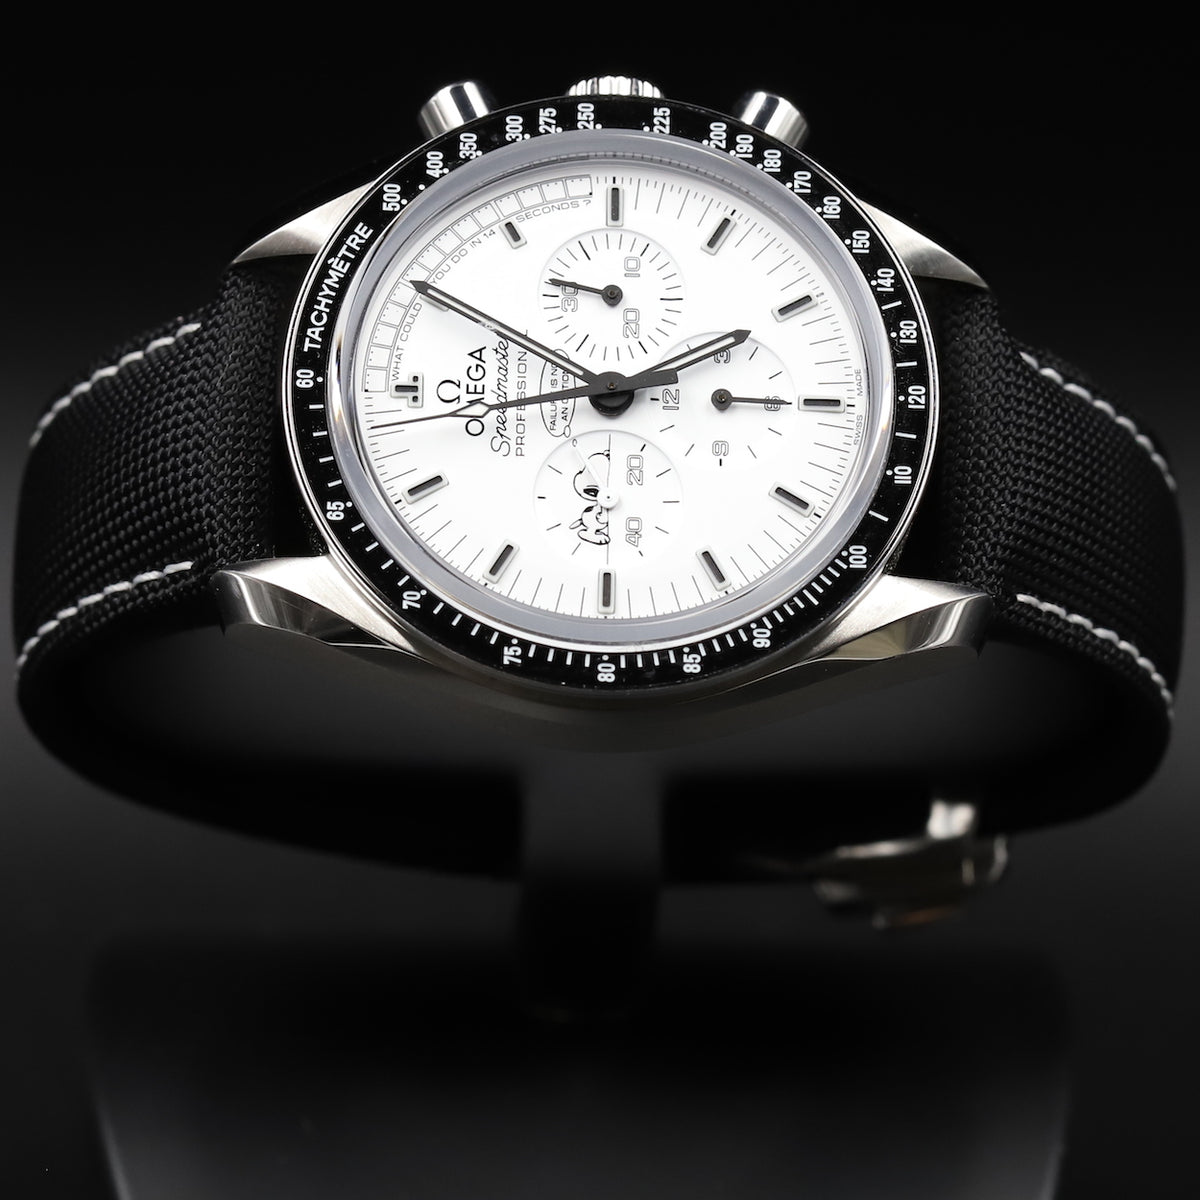 Omega<br>311.32.42.30.04.003 Speedmaster Moonwatch Anniversary Limited Series Apollo 13 Silver Snoopy Award